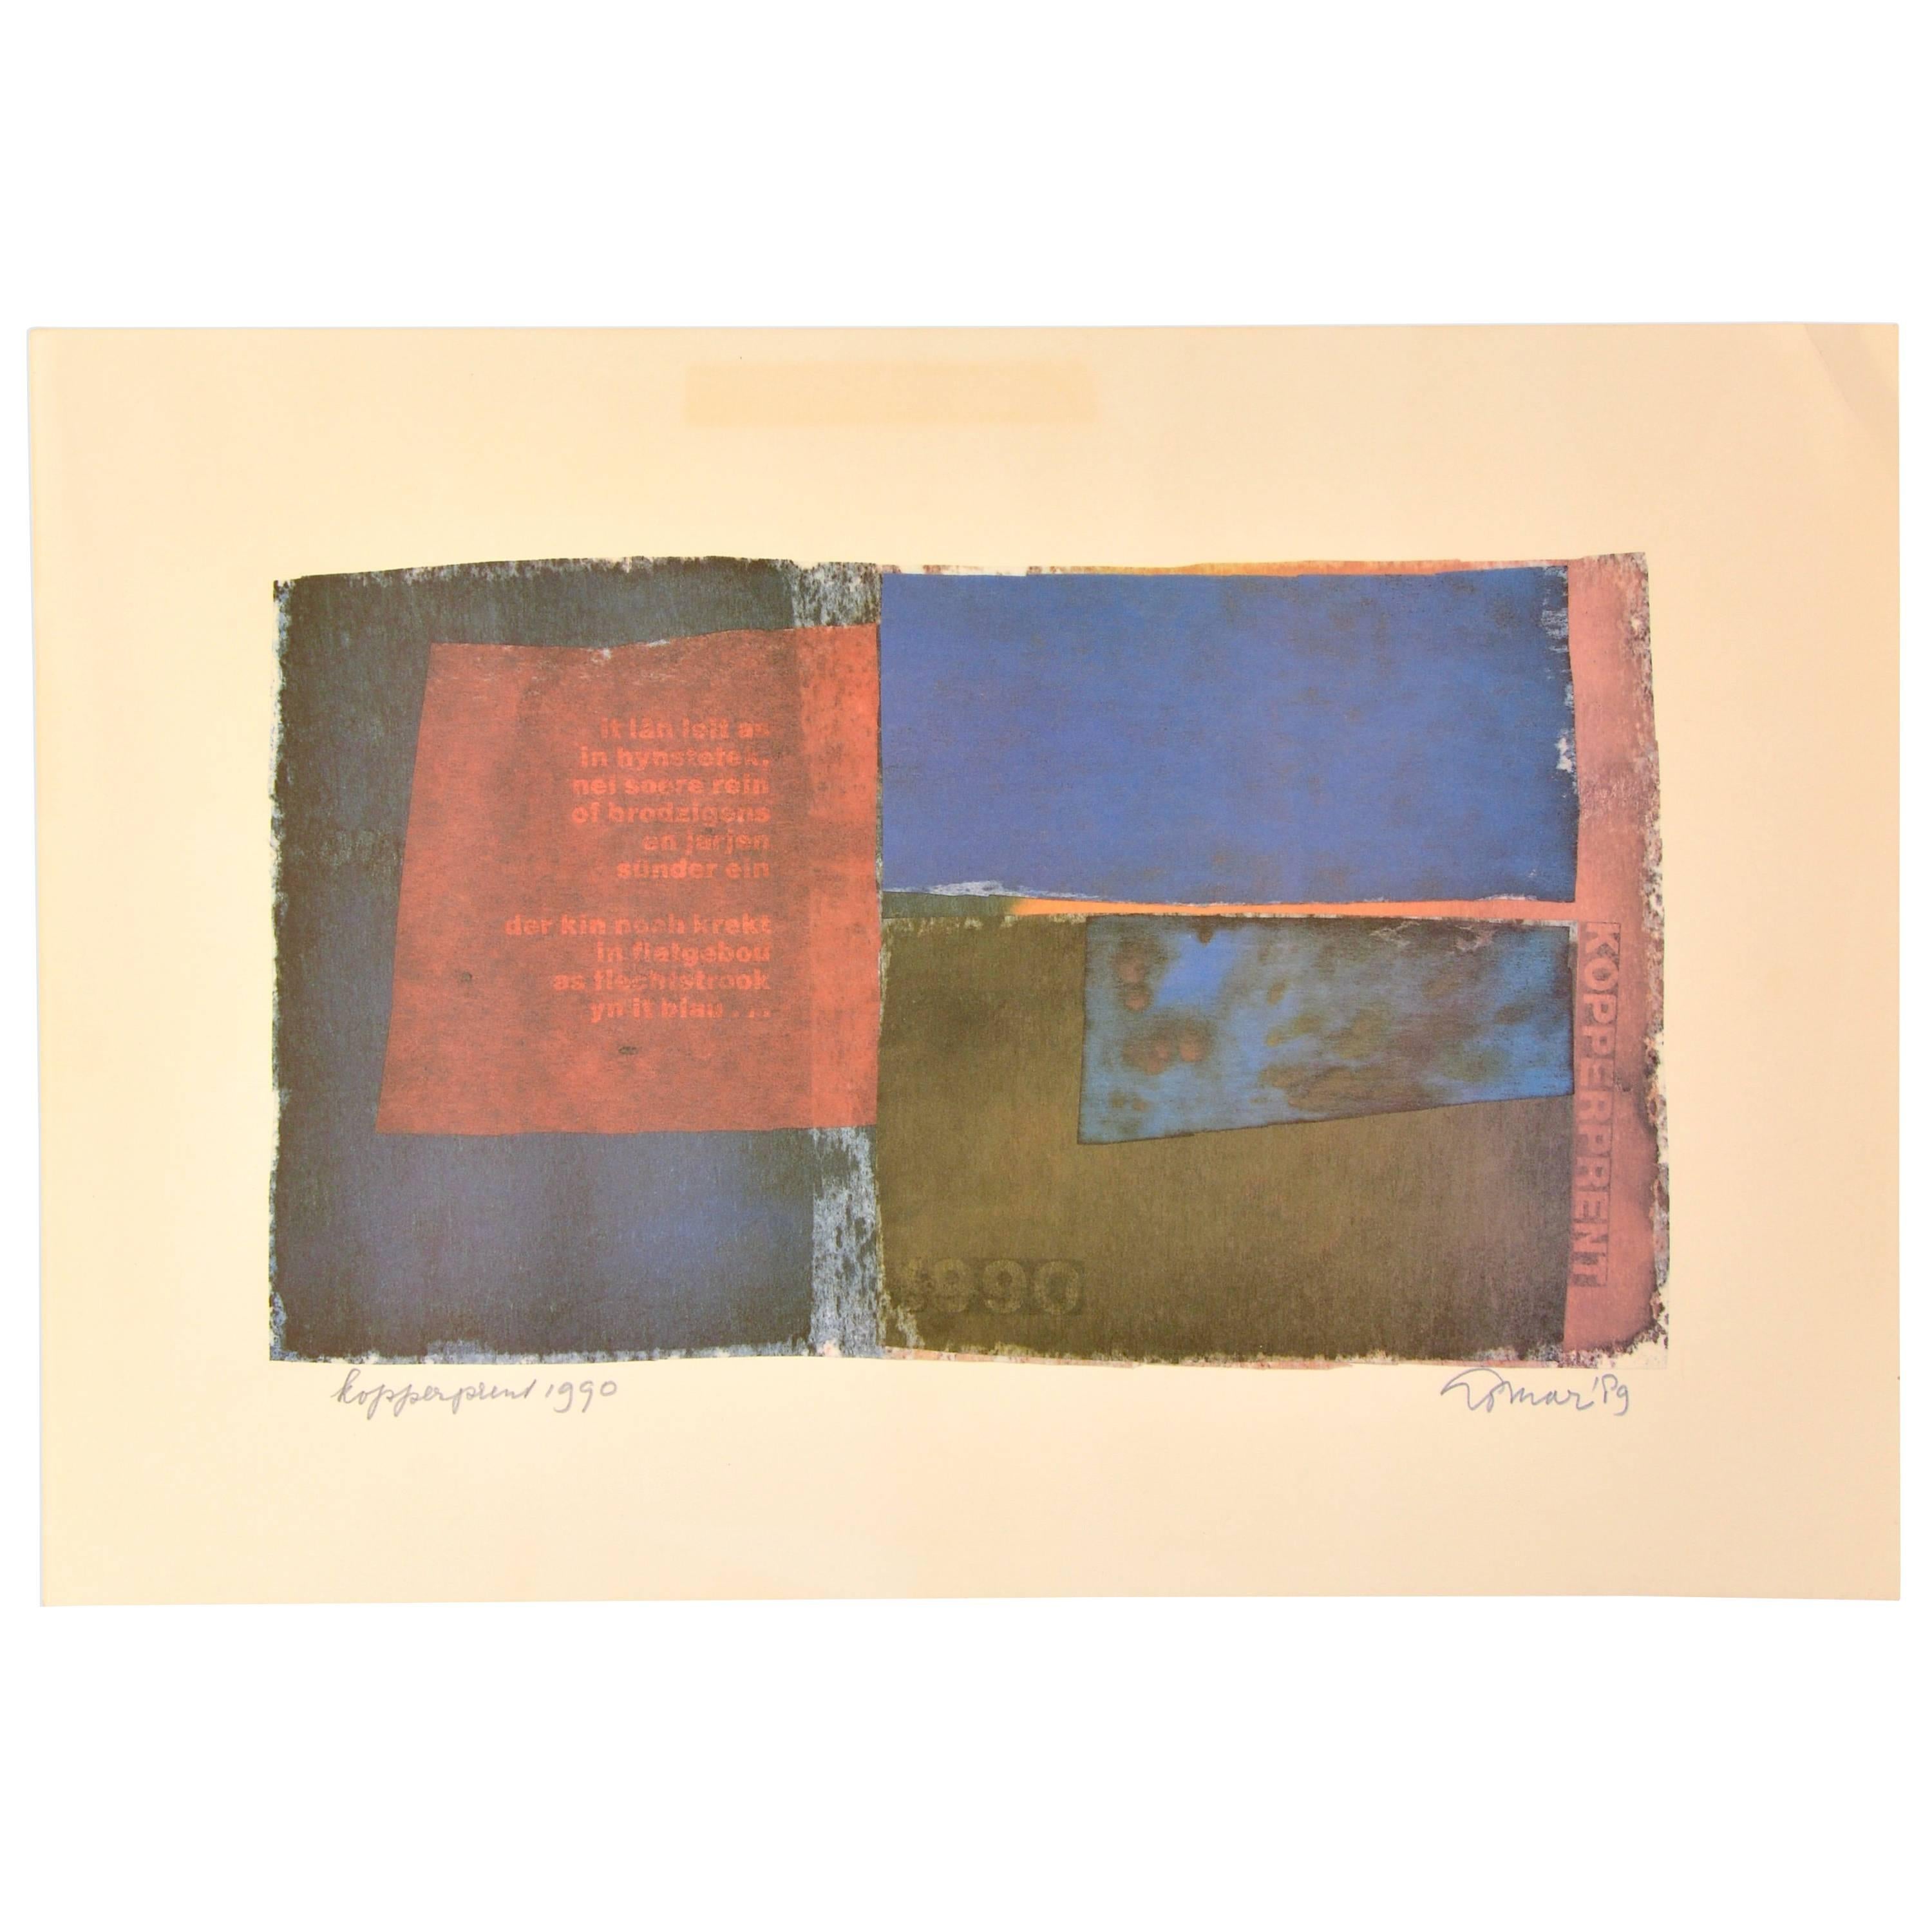 Signed Composition by Jan Loman, 1990